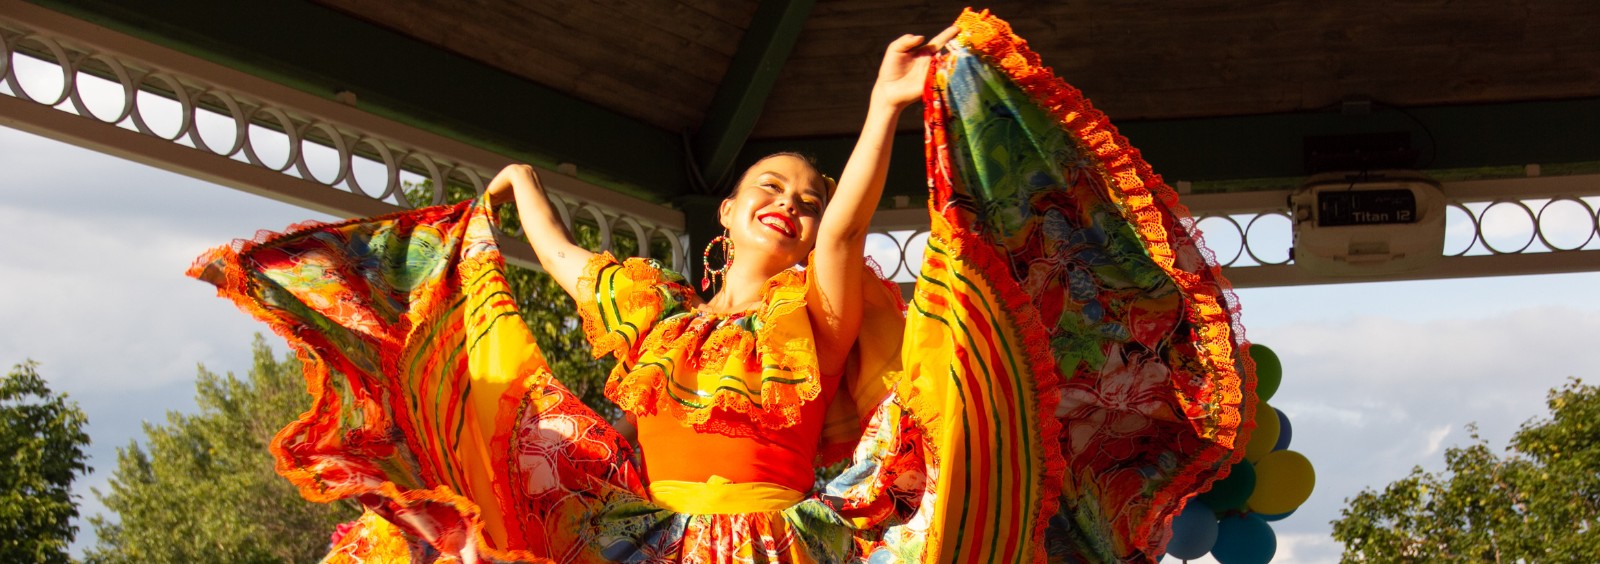 A woman smiling and dancing while wearing a colourful dress.